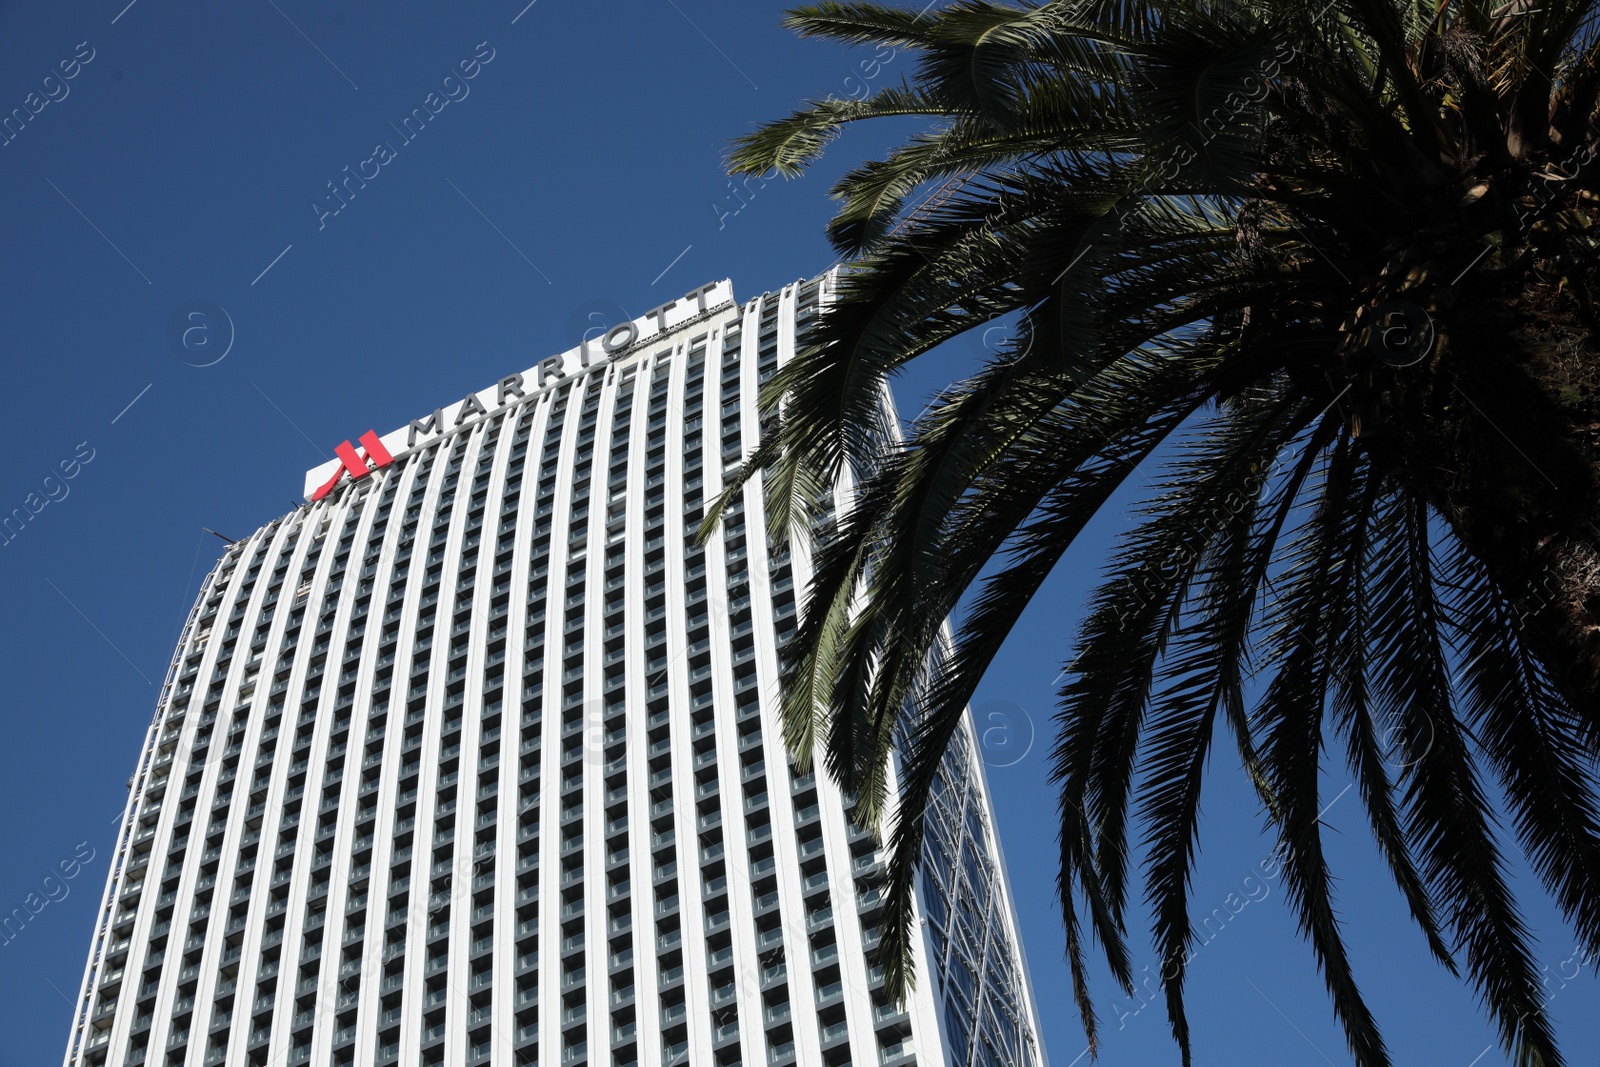 Photo of Batumi, Georgia - October 12, 2022: Mariott building and palm tree against blue sky, low angle view